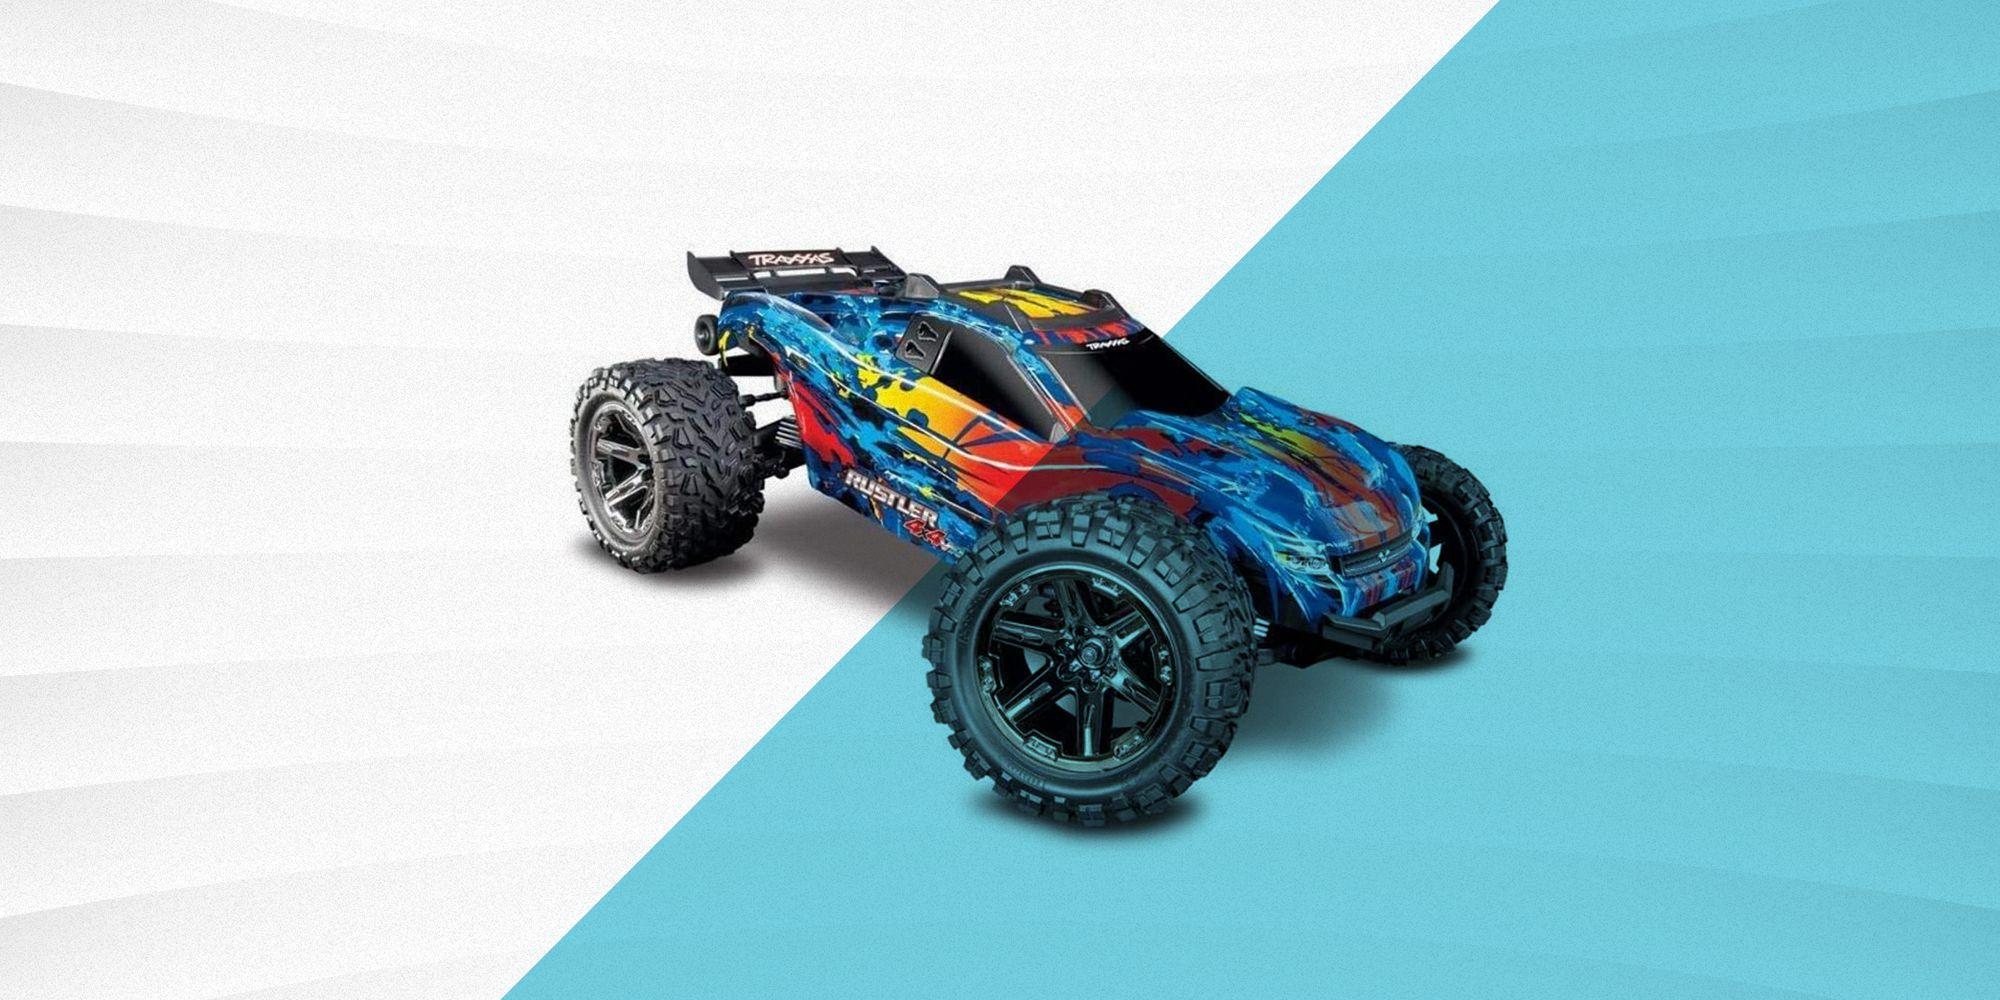 Remote Control Car Price 500: Top remote control cars under $500 to consider